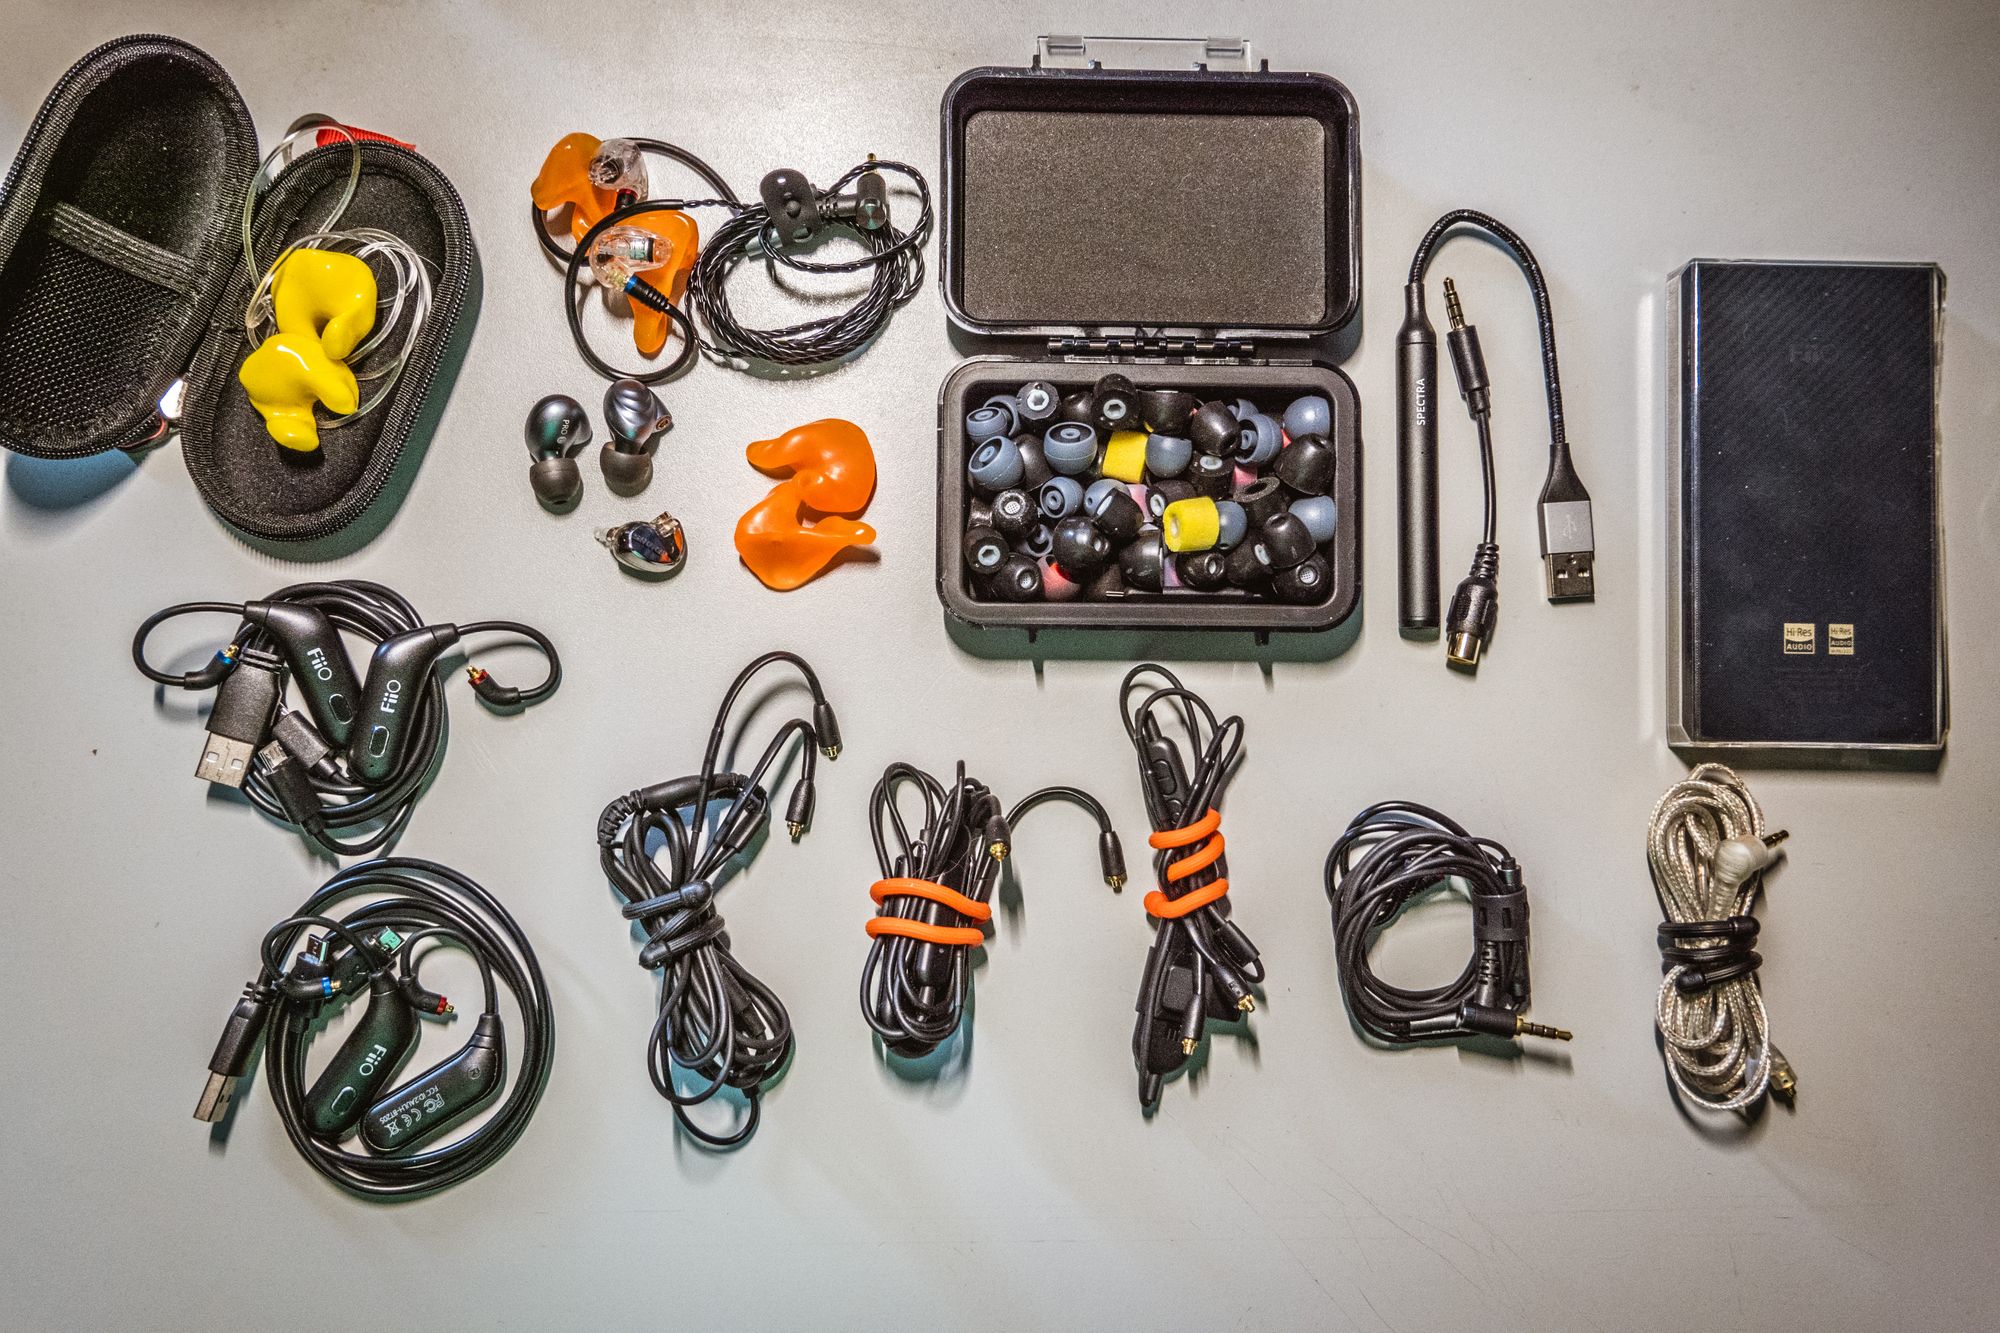 A FiiO m11, 2 sets of FiiO UTWS1's, 2 Shure BT cables, 2 balanced headphone wires, DAC, hearing protection, molded ear pieces, standard ear pieces, broken Sure ear buds